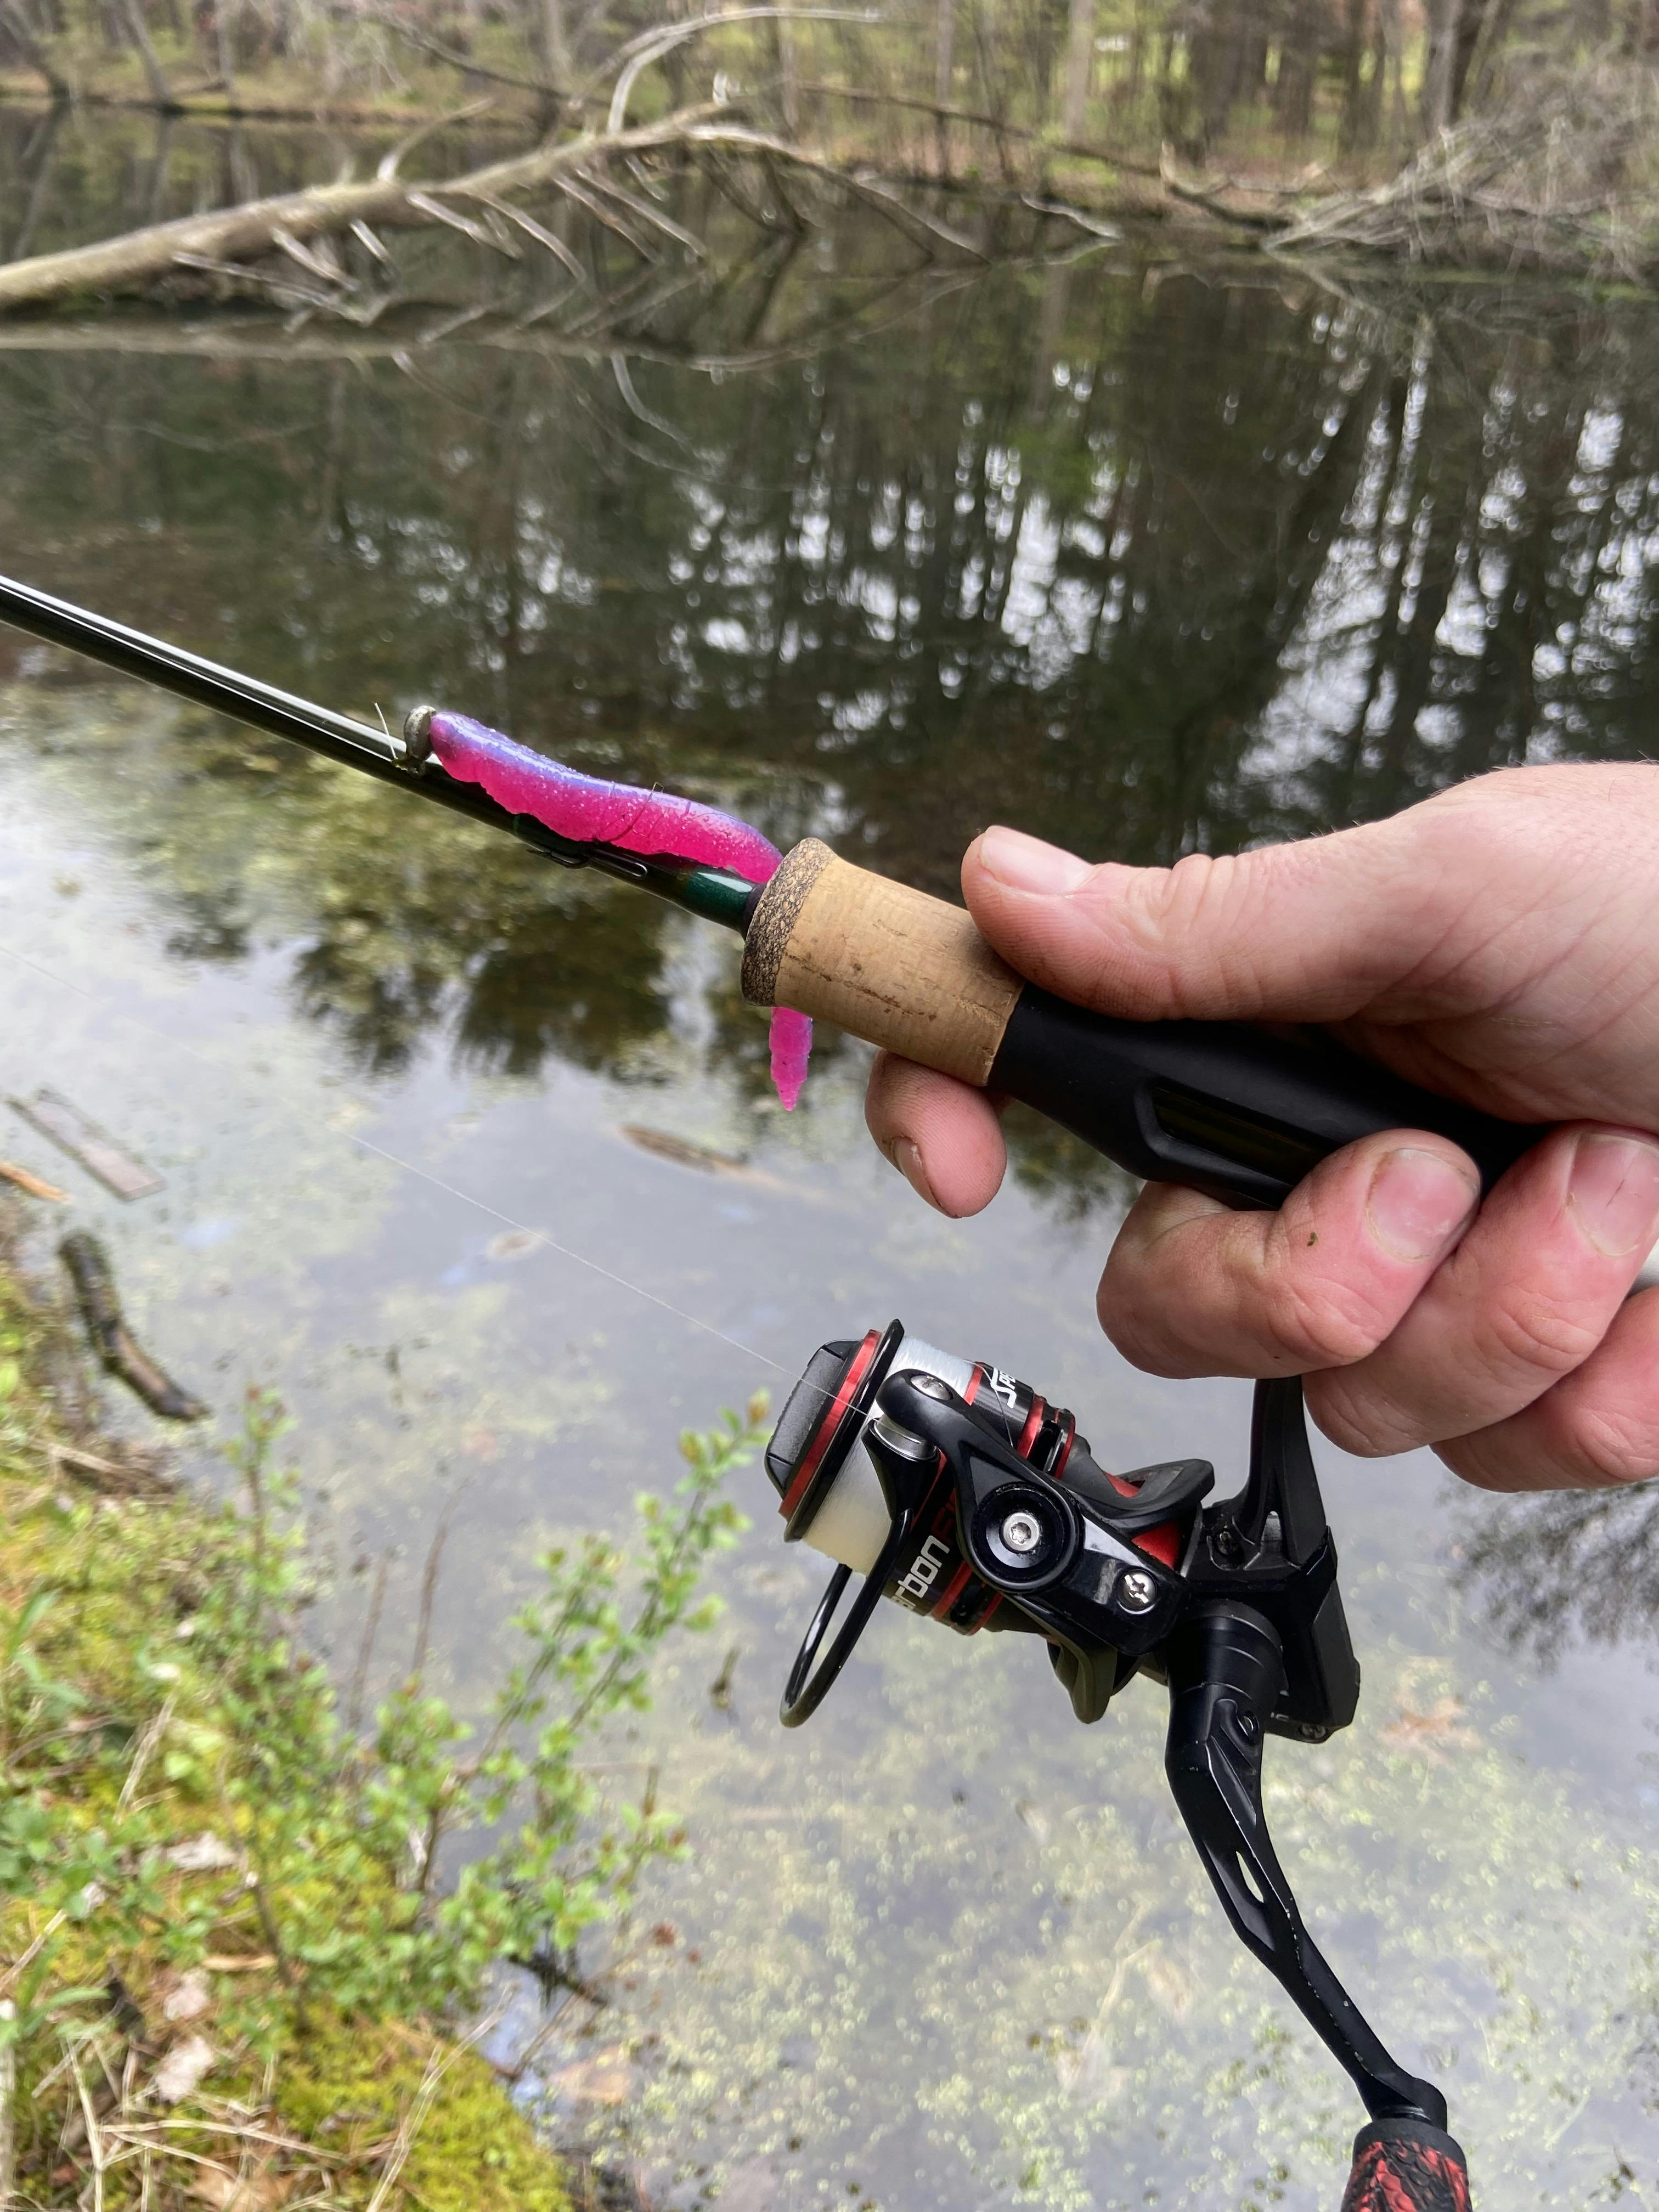 Good UL Spinning rod and reel for panfish - Fishing Rods, Reels